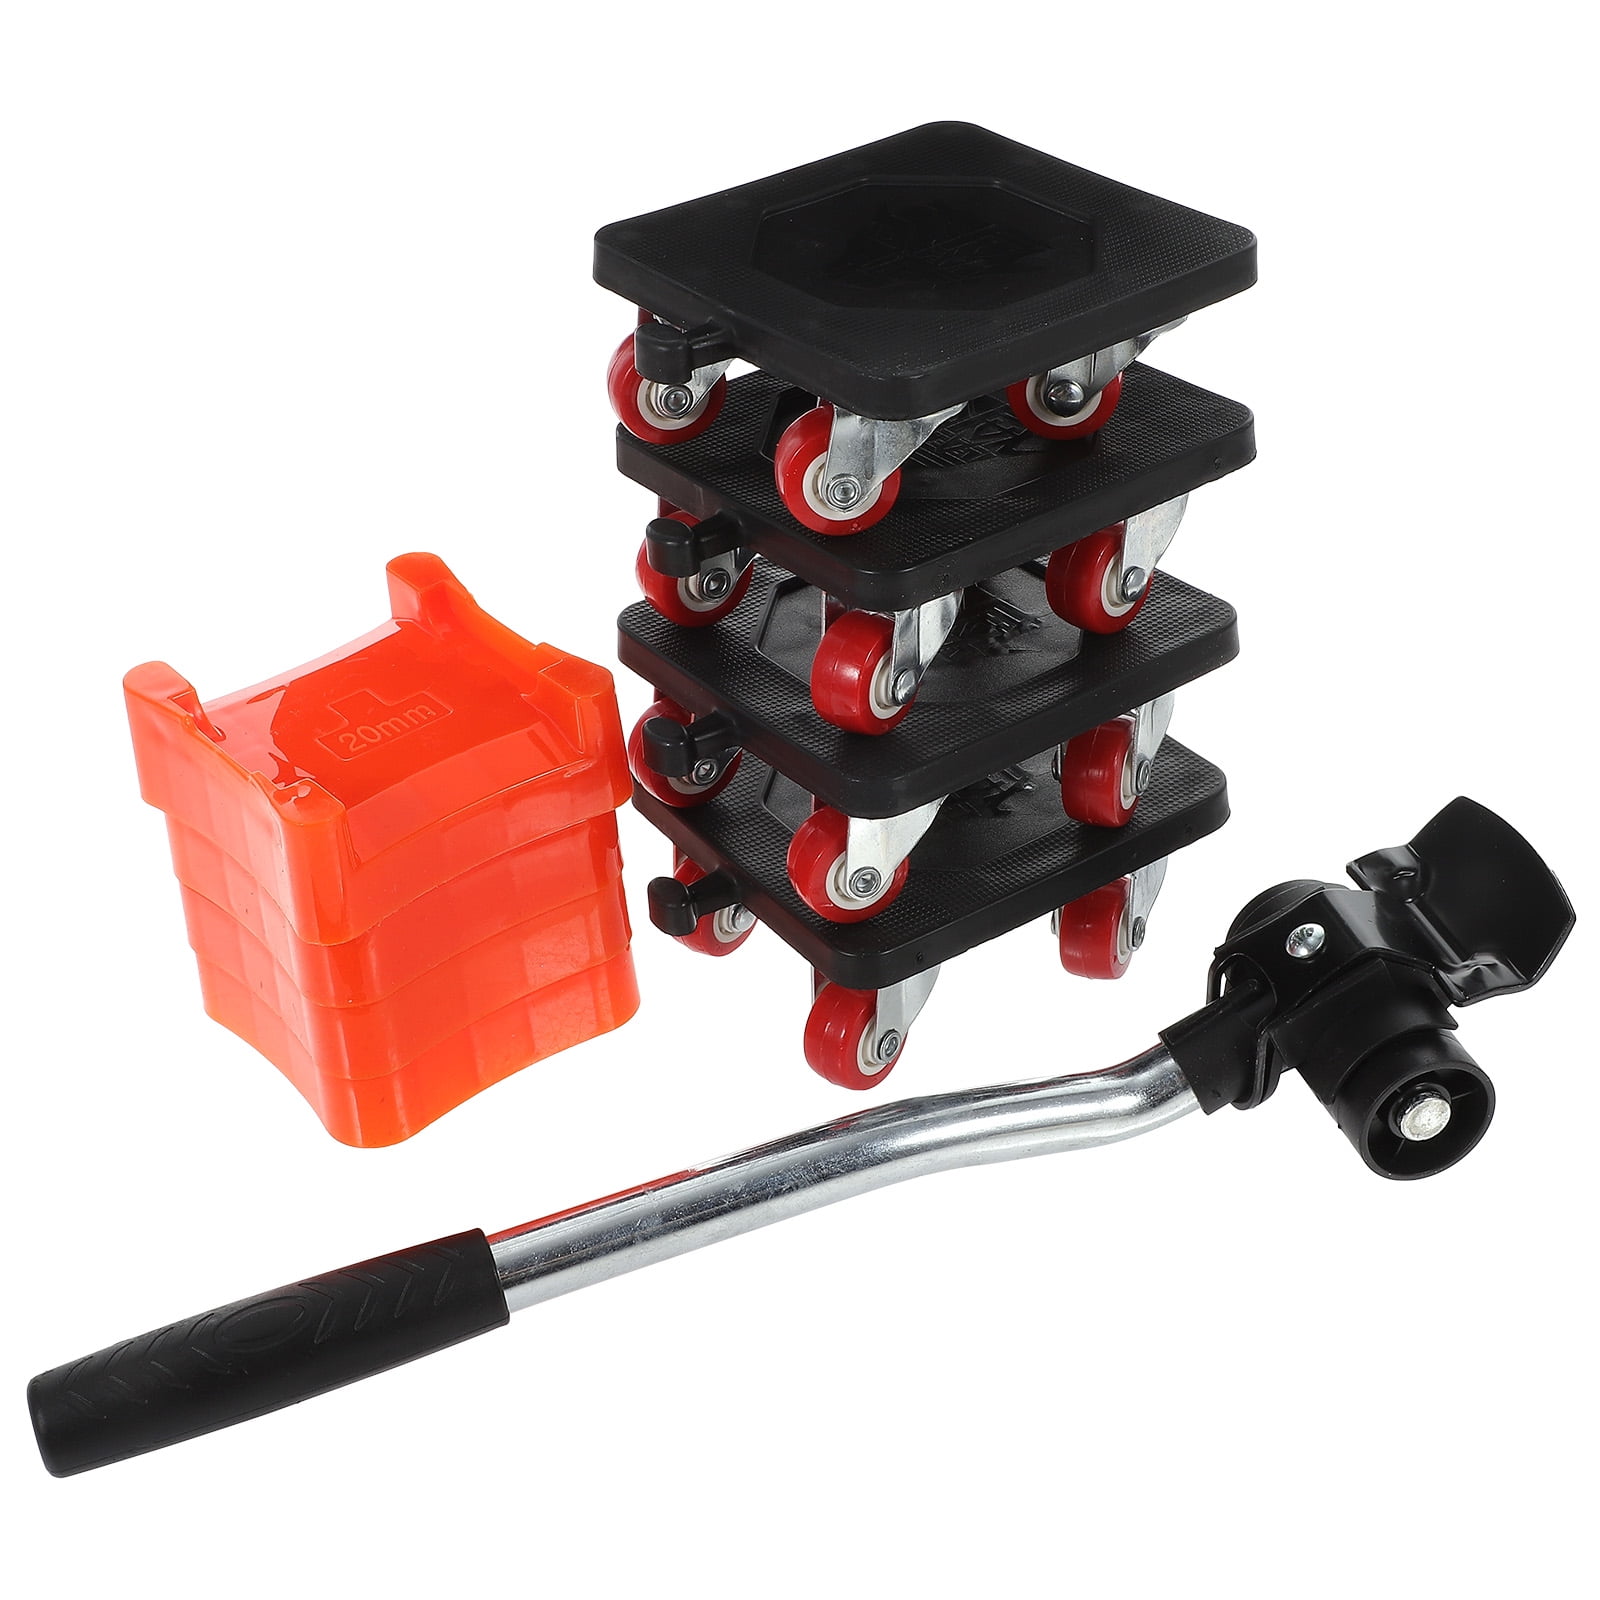 Furniture Lifter Tool Transport Shifter - Heavy Duty Appliance Rollers  Moving Men Furniture Or Refrigerator Sliders for Tile Floors - Appliance  Mover Leverage Tools for Hardwood Floors 